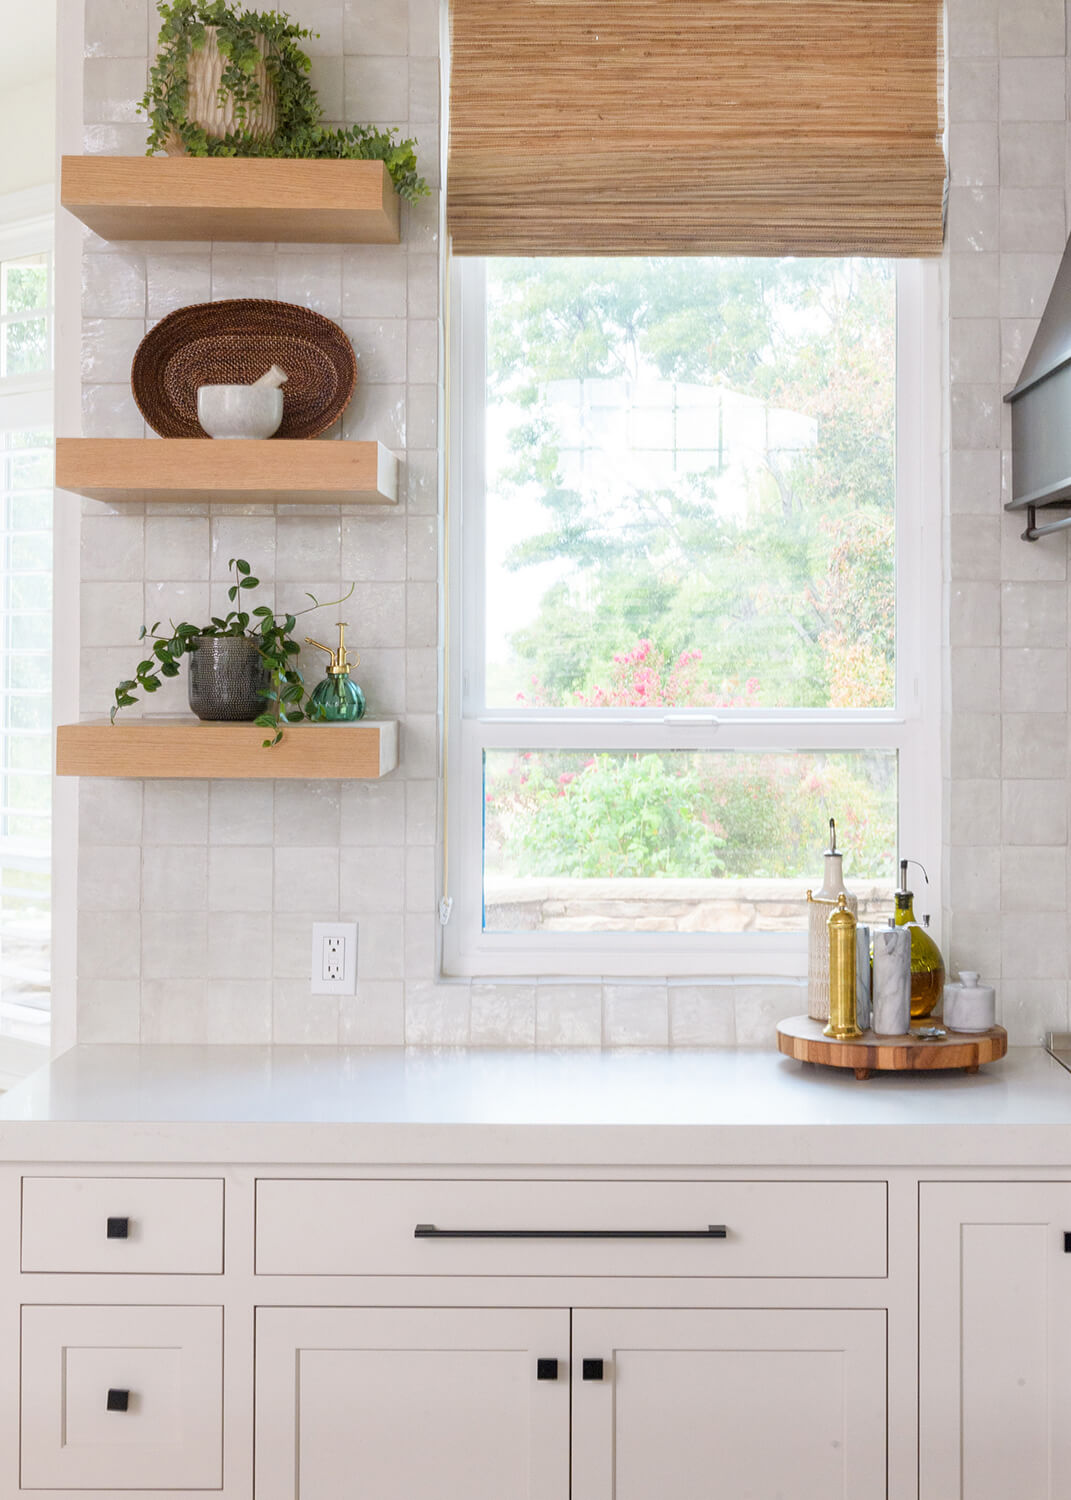 A kitchen remodel with a coastal style featuring beachy blinds and floating shelves for displaying decor.